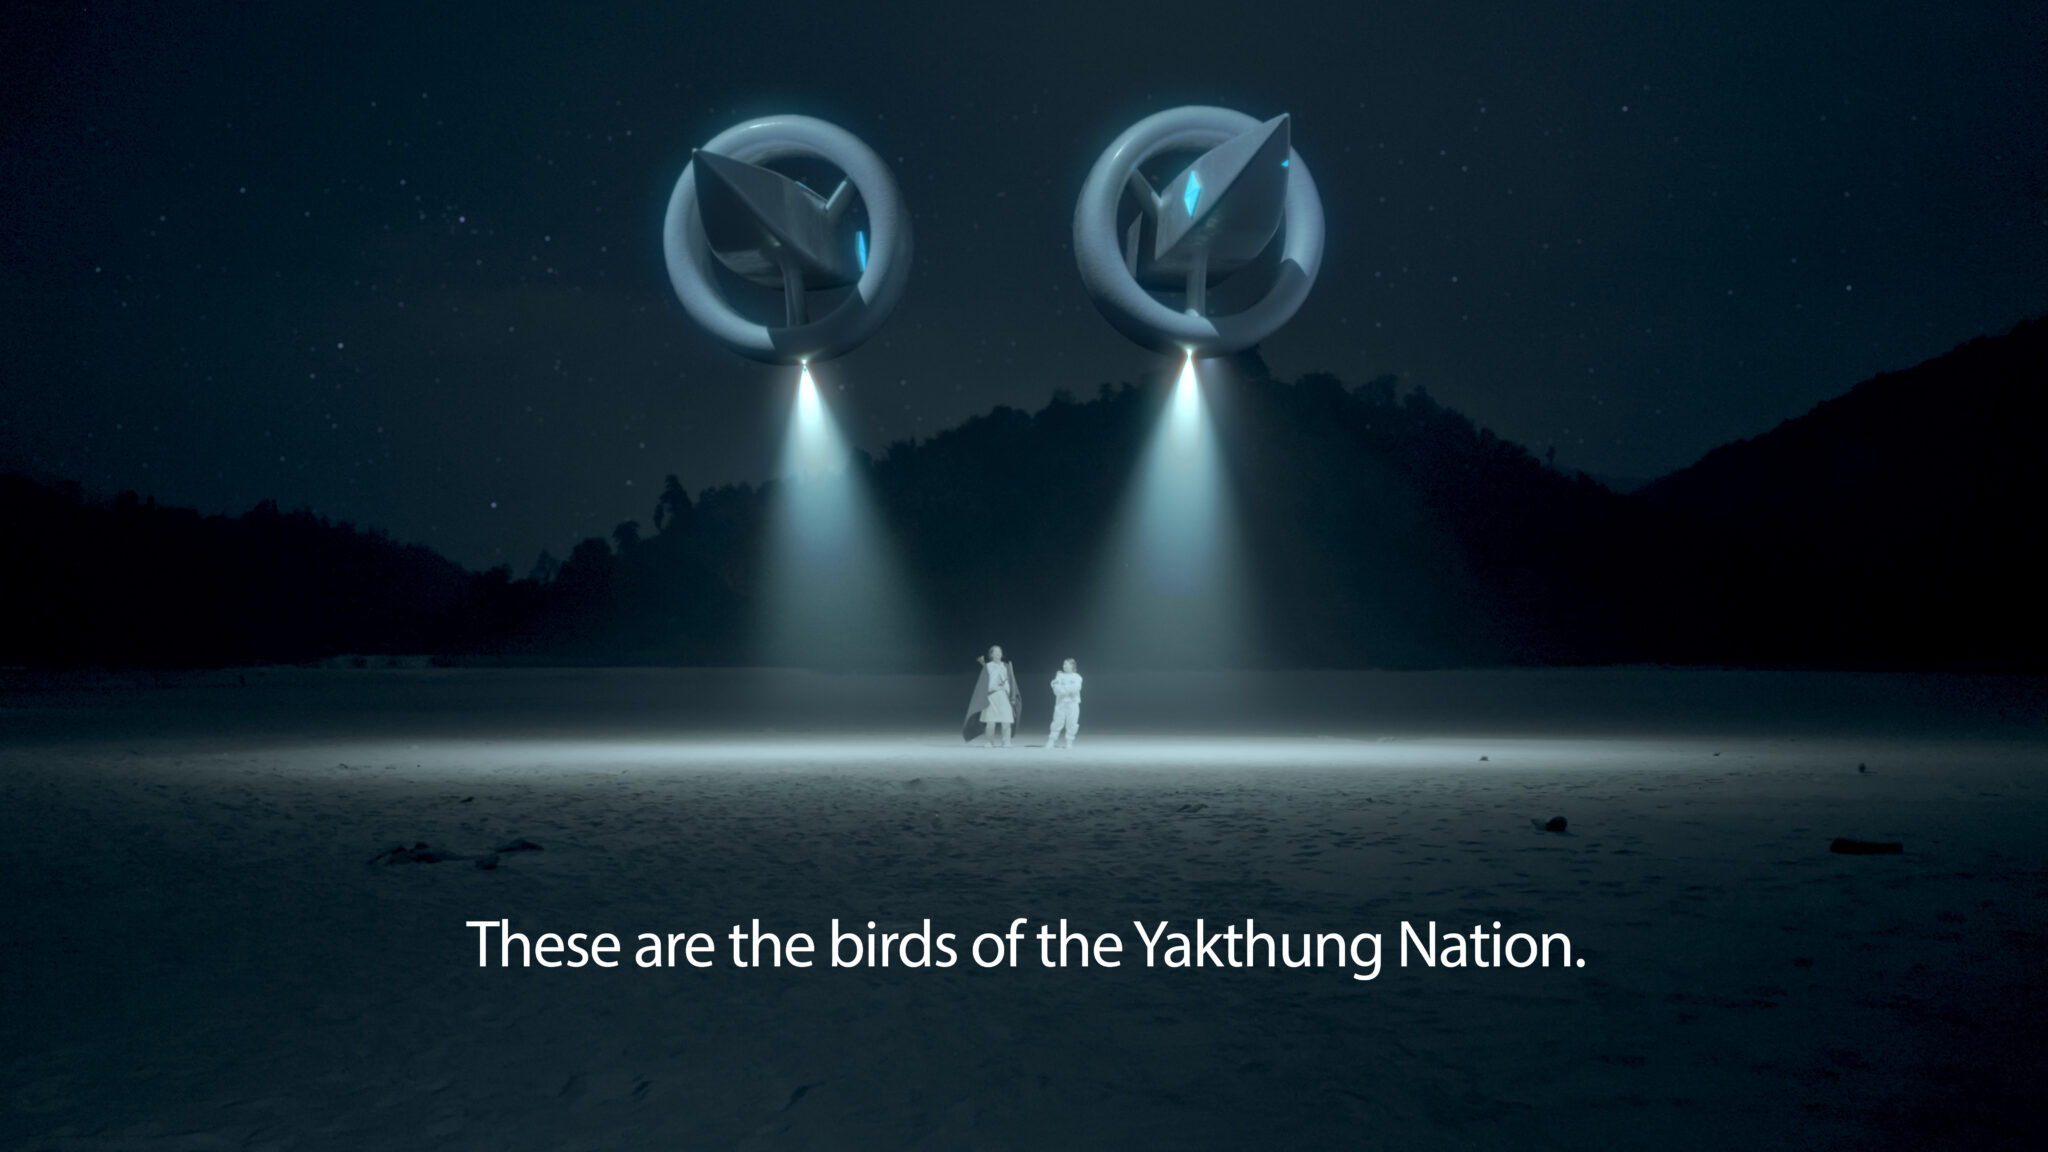 Still Image from Subash's Video. In the image are two floating, UFO-like structures casting light onto a dark landscape. In the background are dark, black mountains against a night sky with faint starlight. There are two small people standing beneath the UFOs. Subtitles read, "These are the birds of the Yakthung Nation."